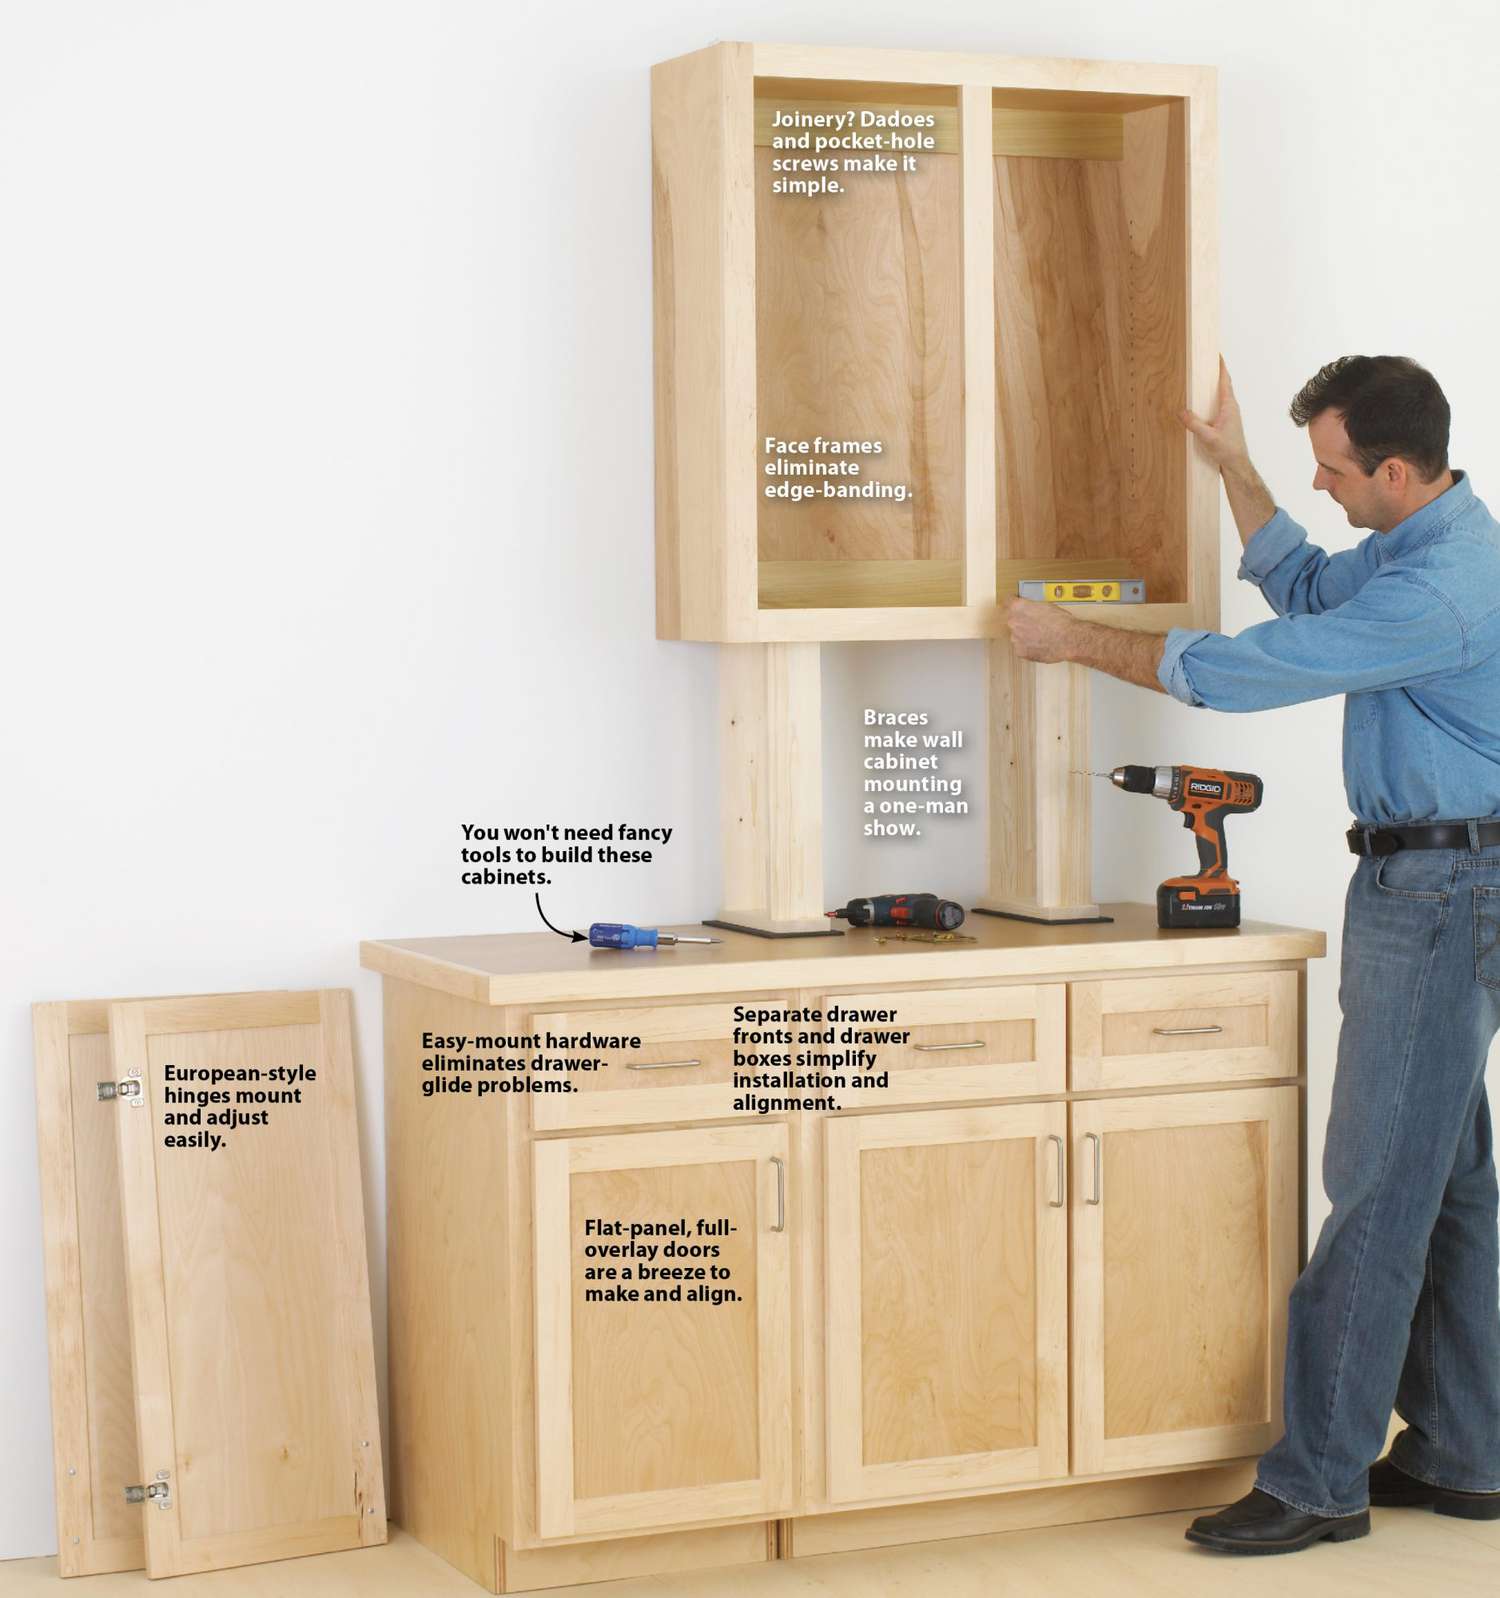 Make Cabinets The Easy Way Wood, How To Build Kitchen Upper Cabinets From Scratch